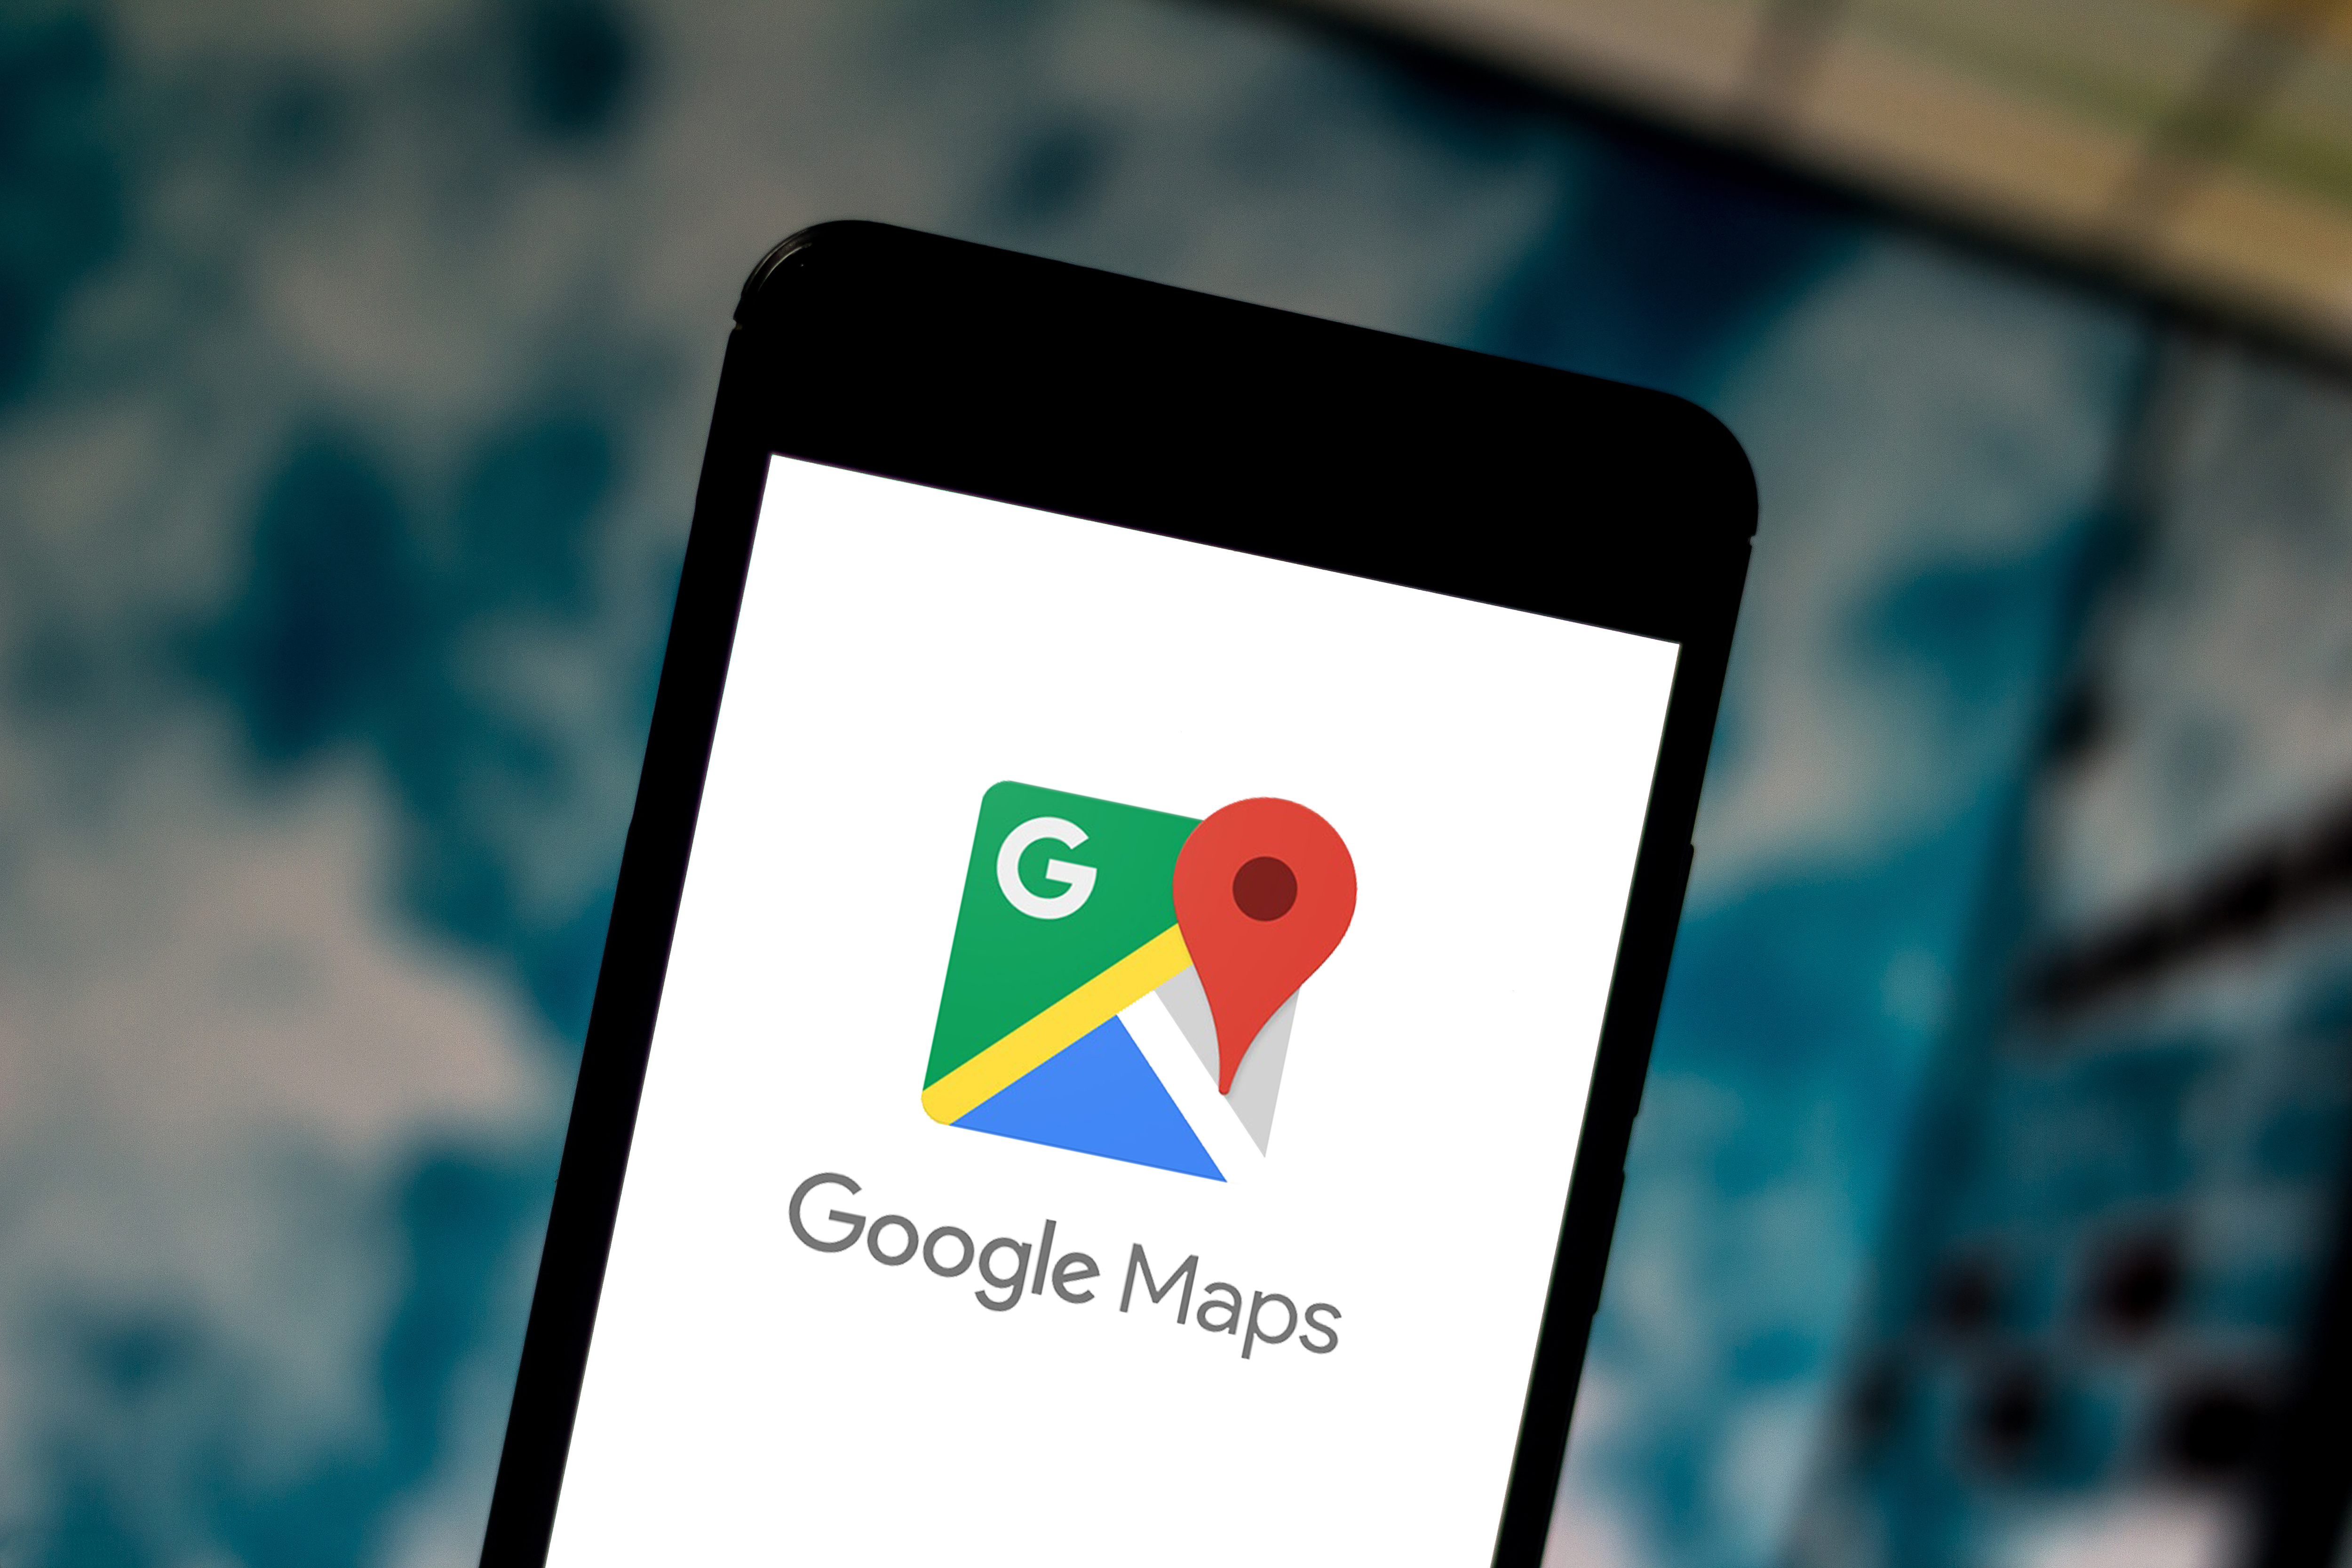 Google Maps translation tools aim to help travelers in foreign countries